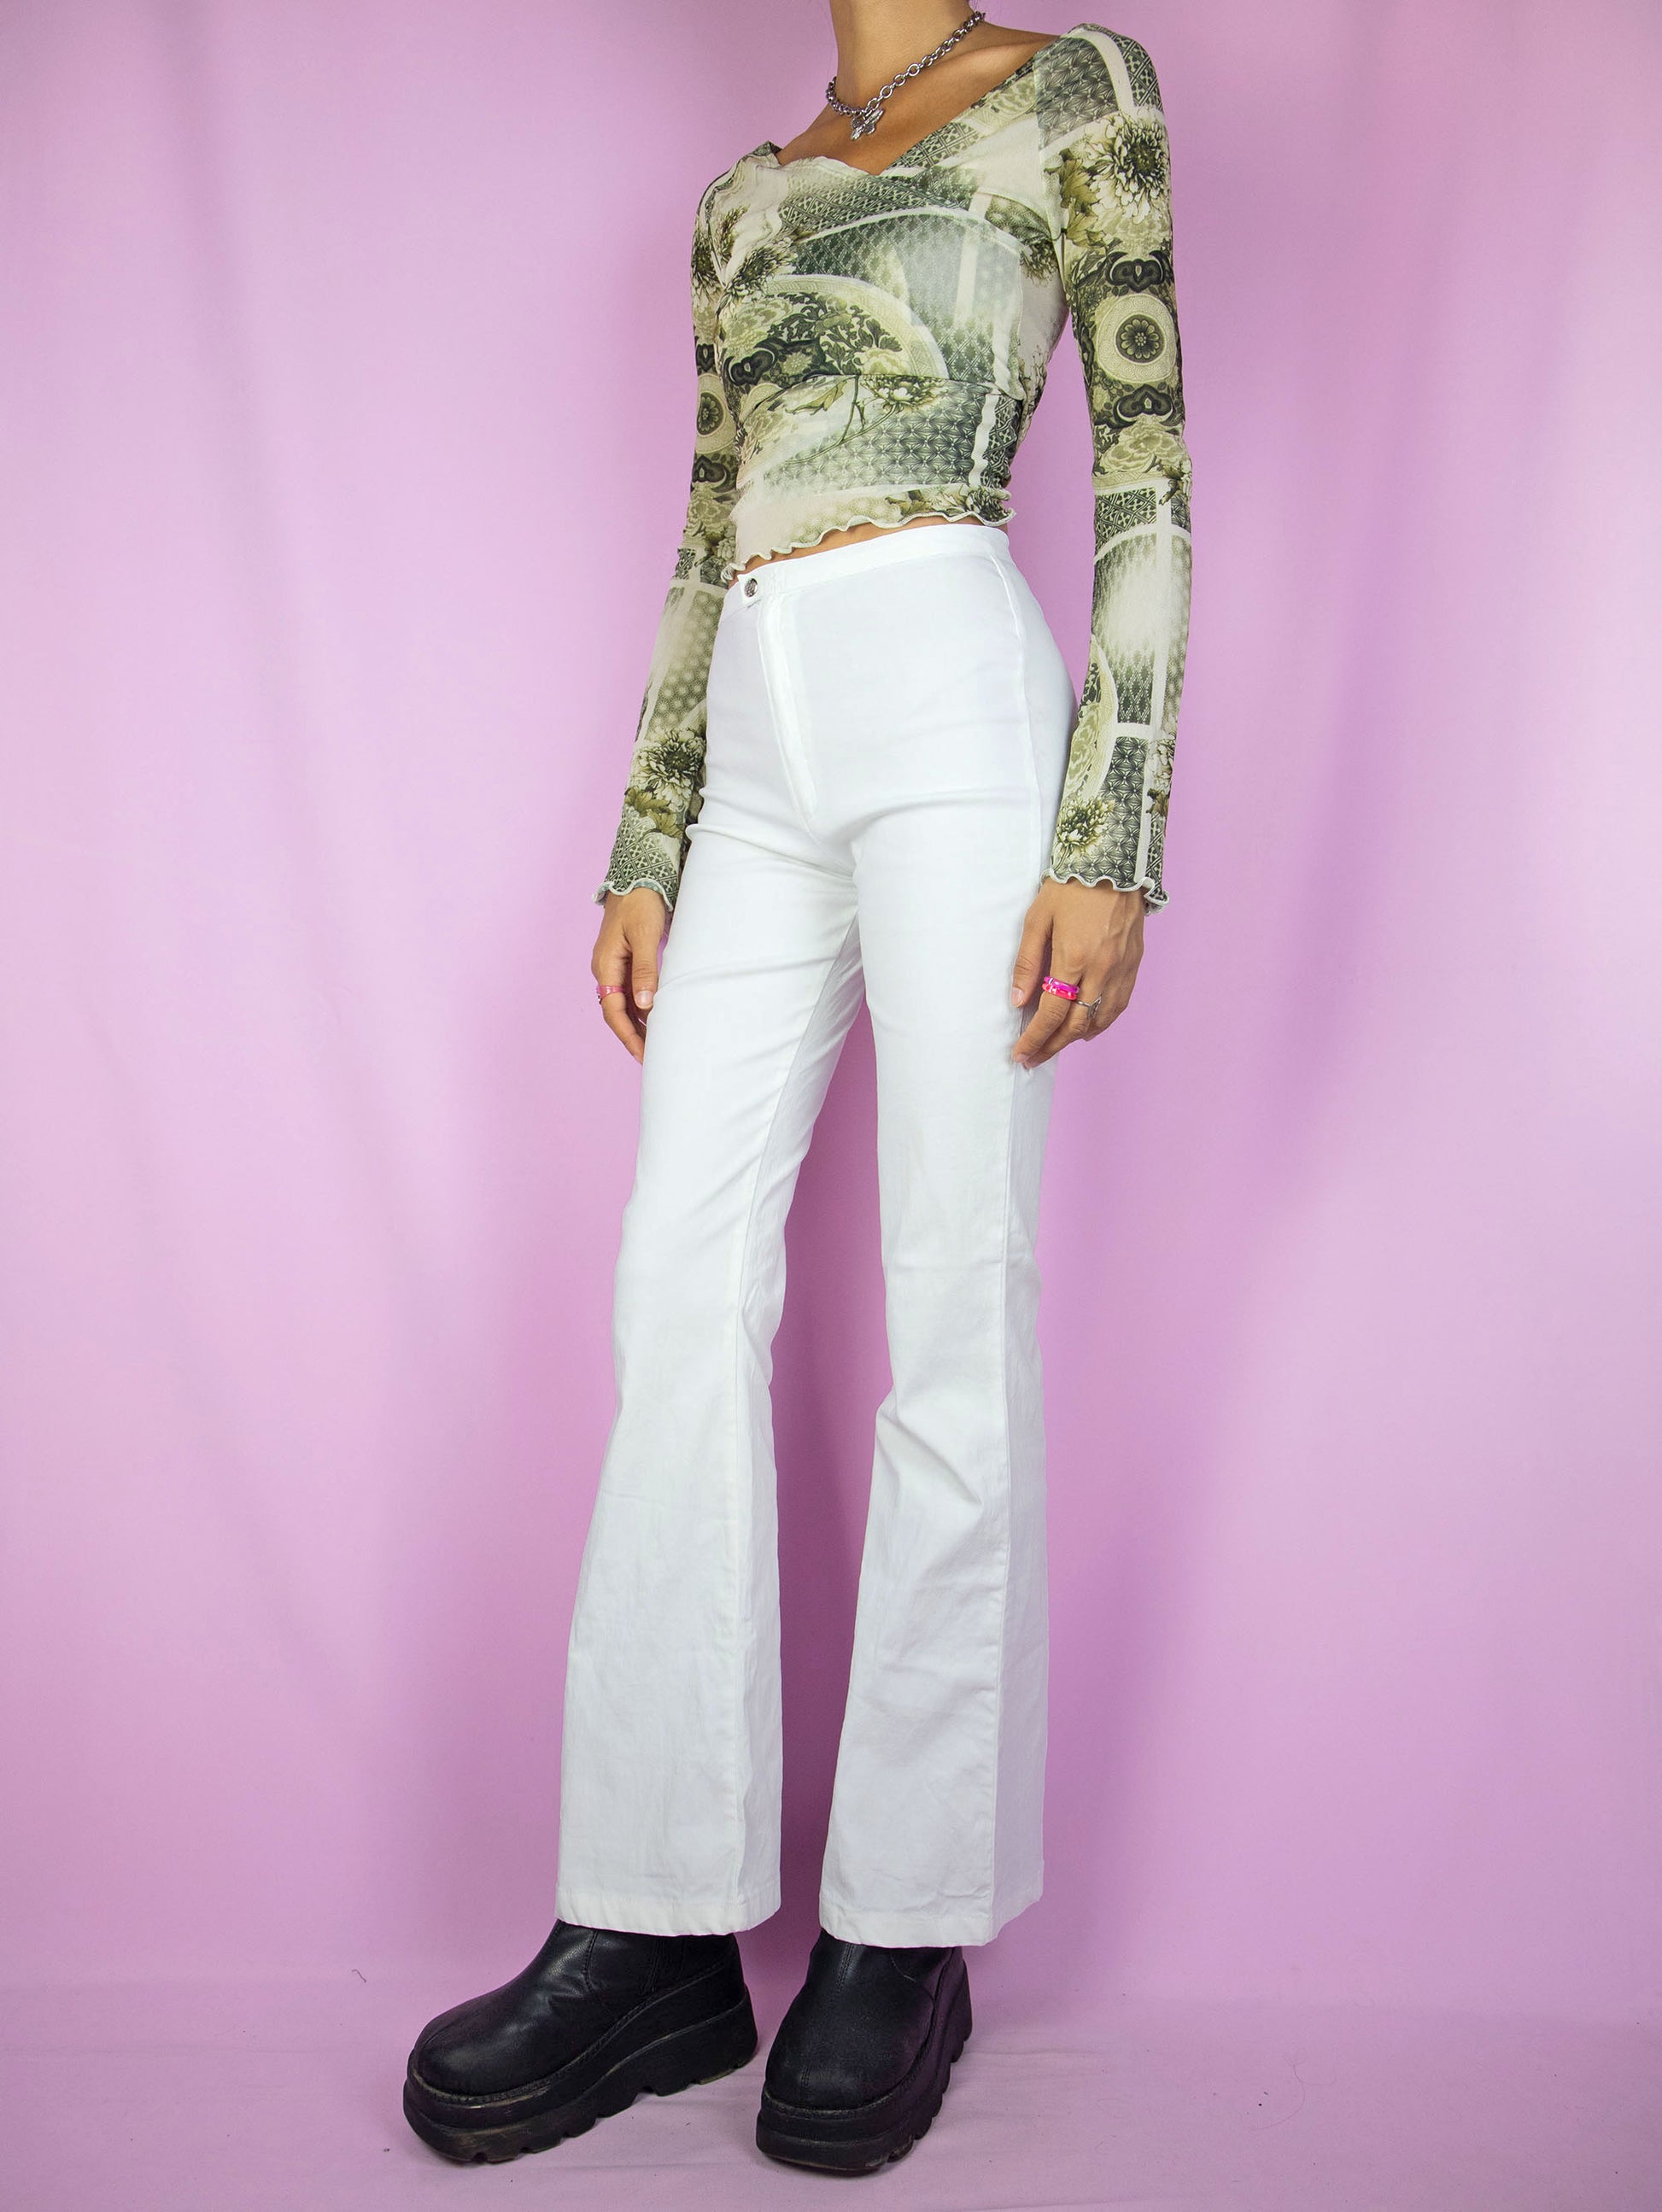 The Y2K White Flare Pants are vintage 2000s stretchy high-waisted pants with a front zipper closure.